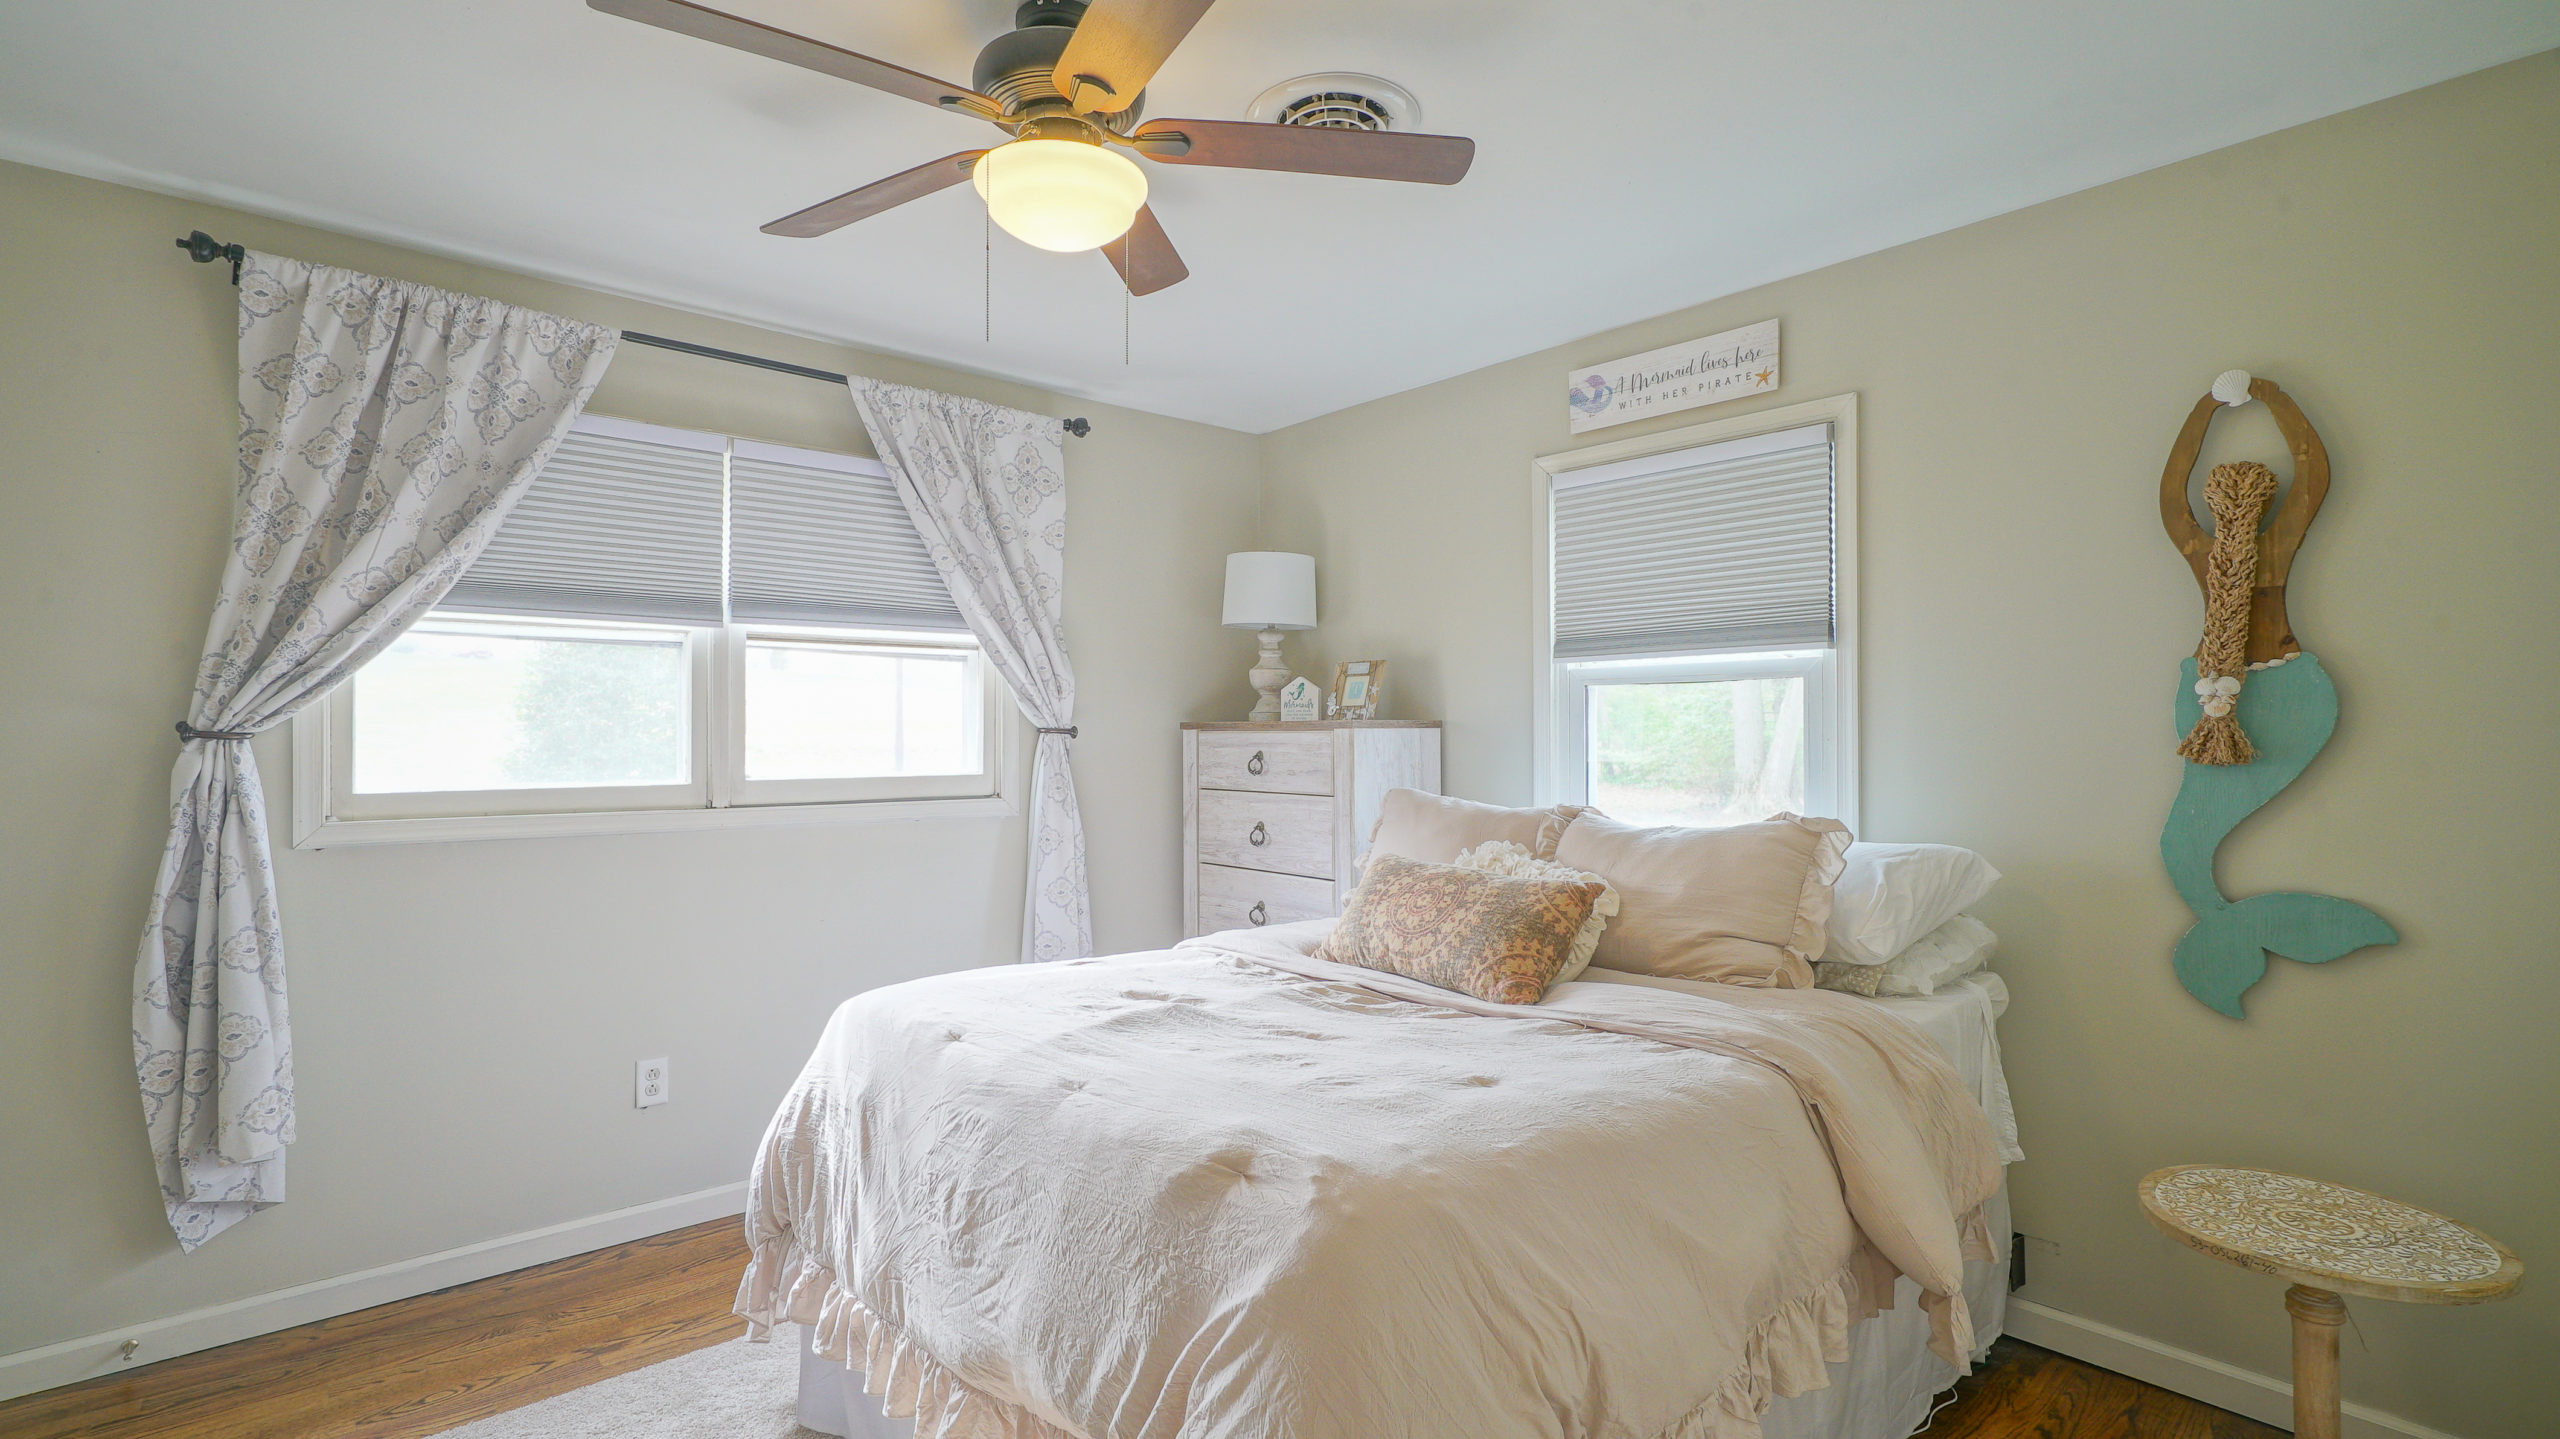 View of Bedroom in a House for Sale in Chestertown Maryland